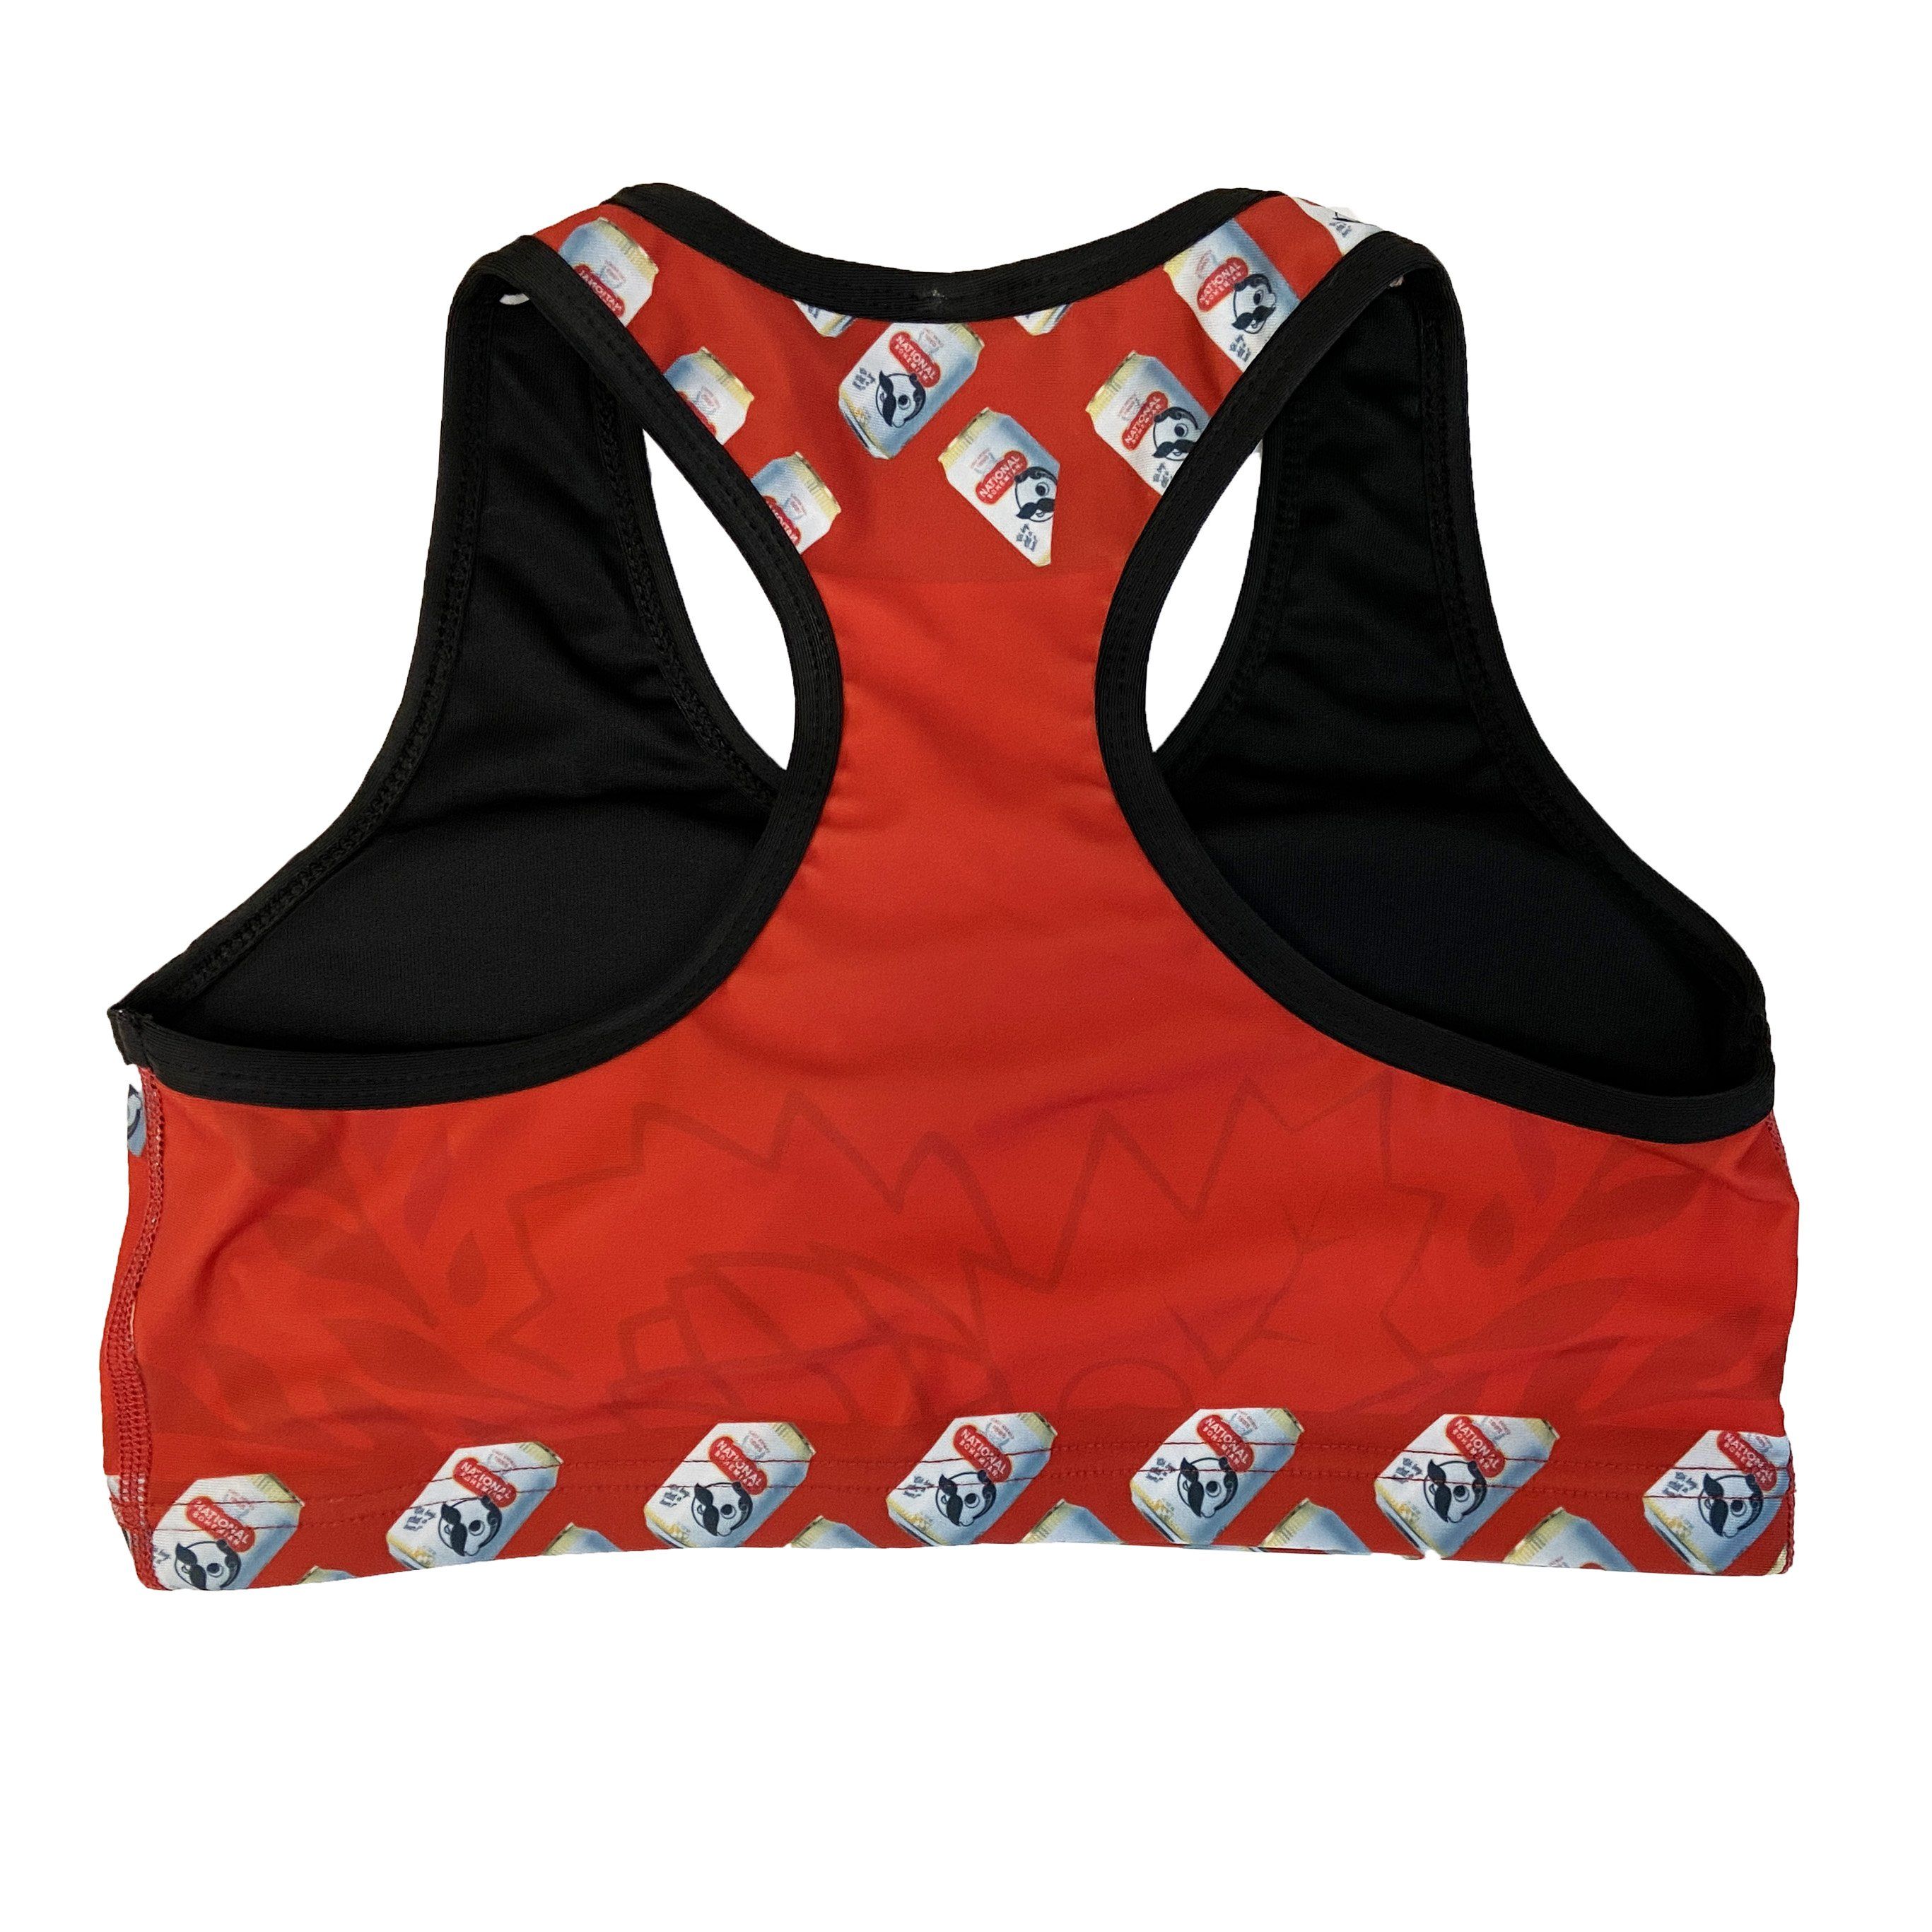 National Bohemian Can Pattern Outline / Sports Bra - Route One Apparel